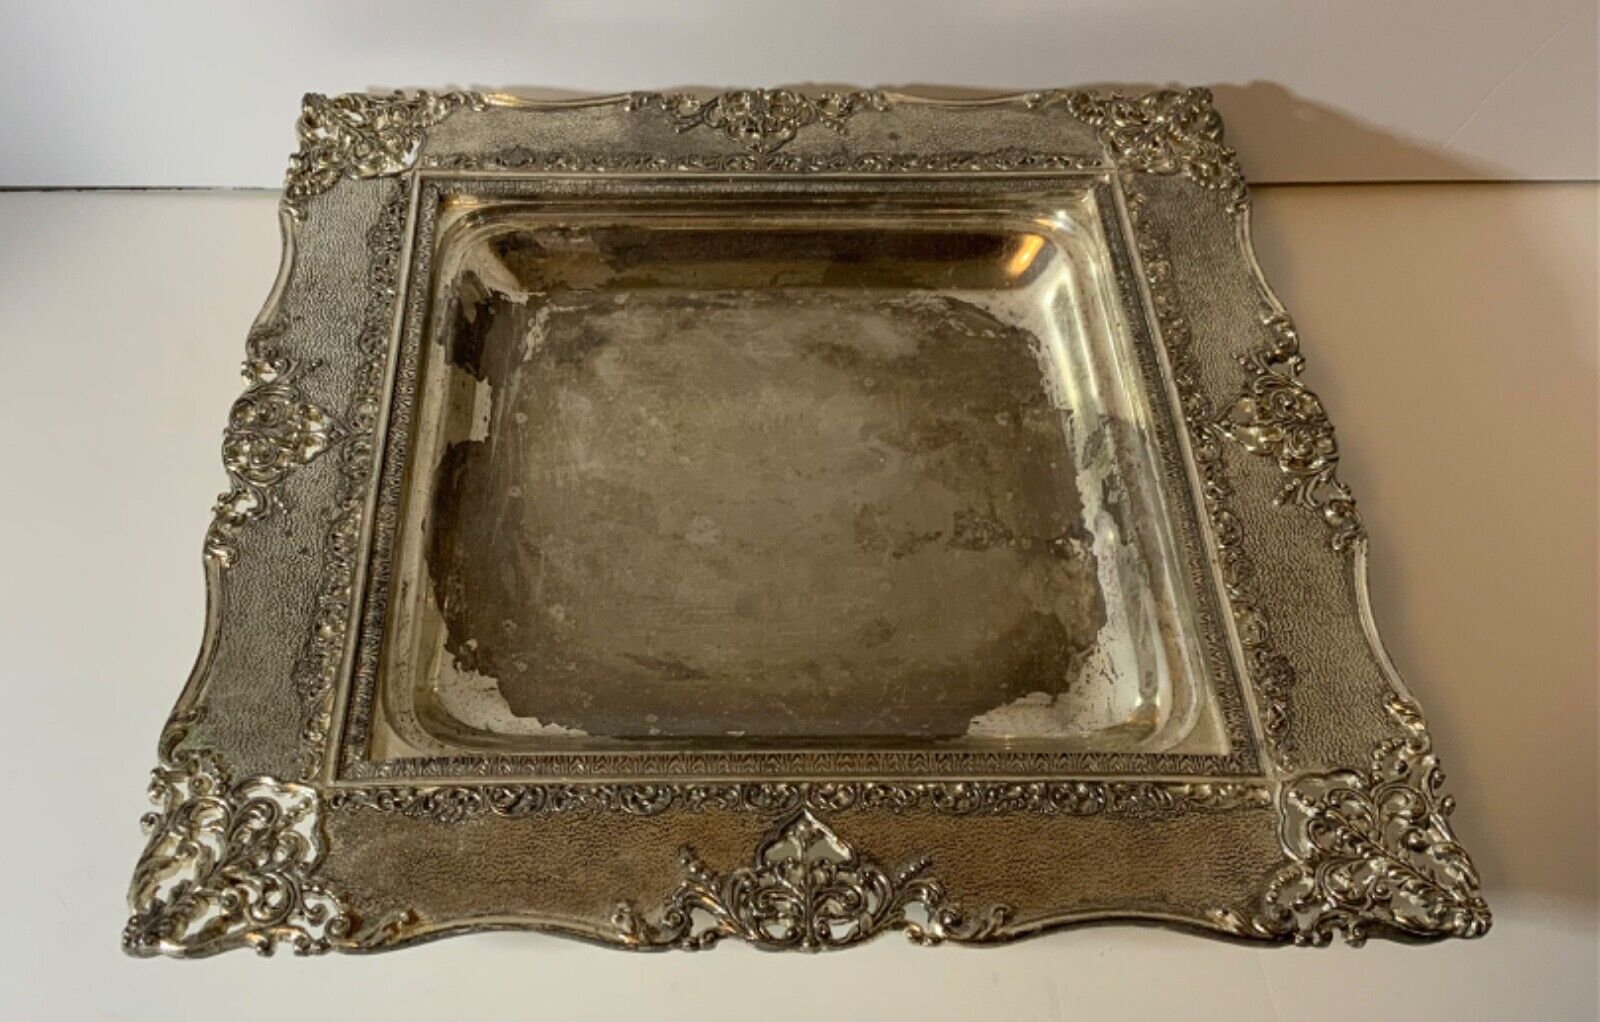 VTG Metal Footed Tray 10” Square Beautiful Detail Embossed Carving 4 Feet Patina